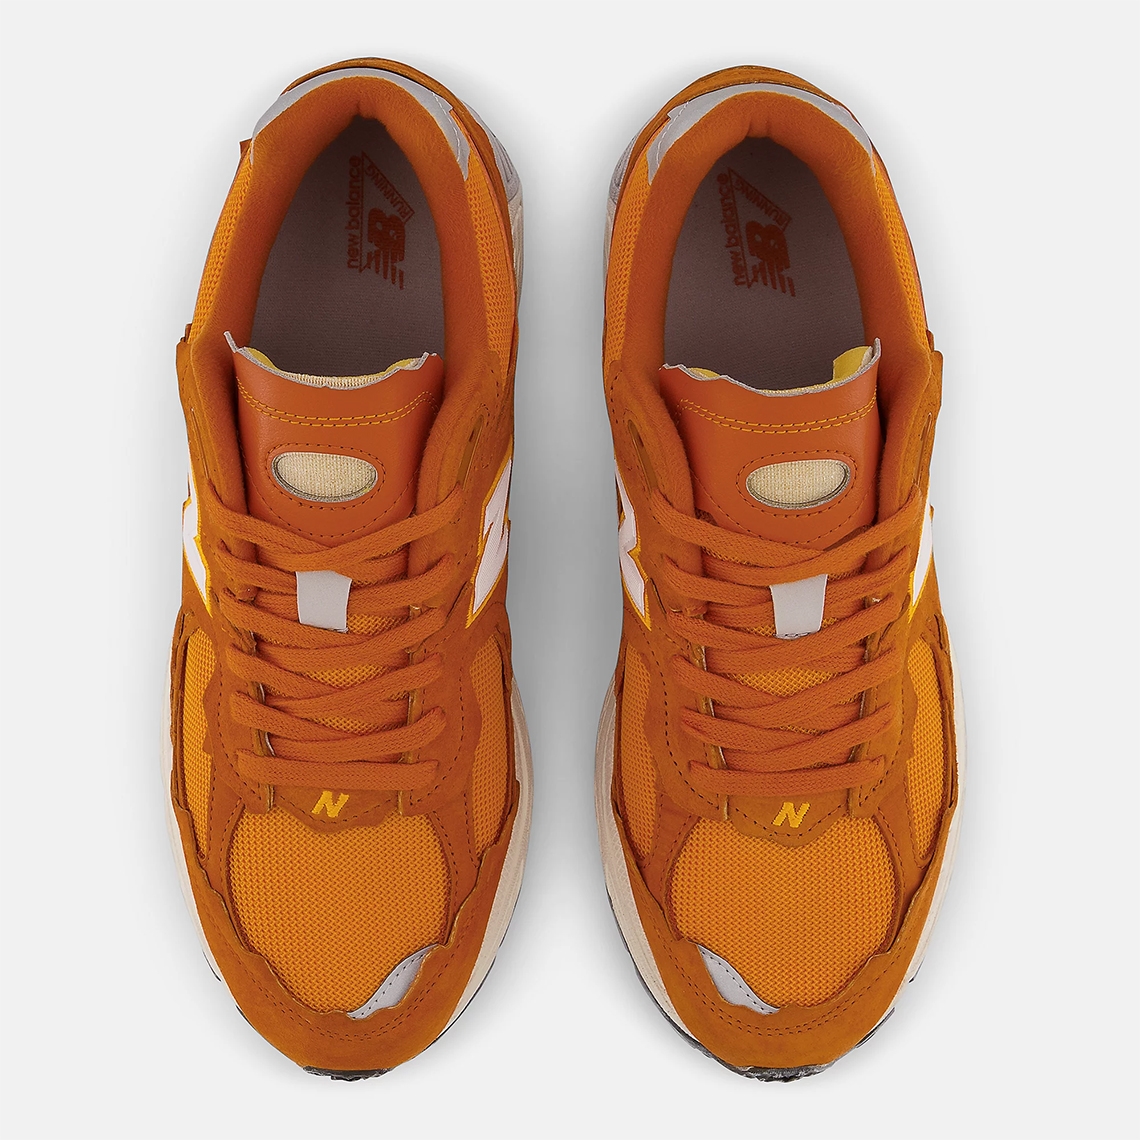 New Balance 2002r Protection Pack Orange M2002rde Release Date 4